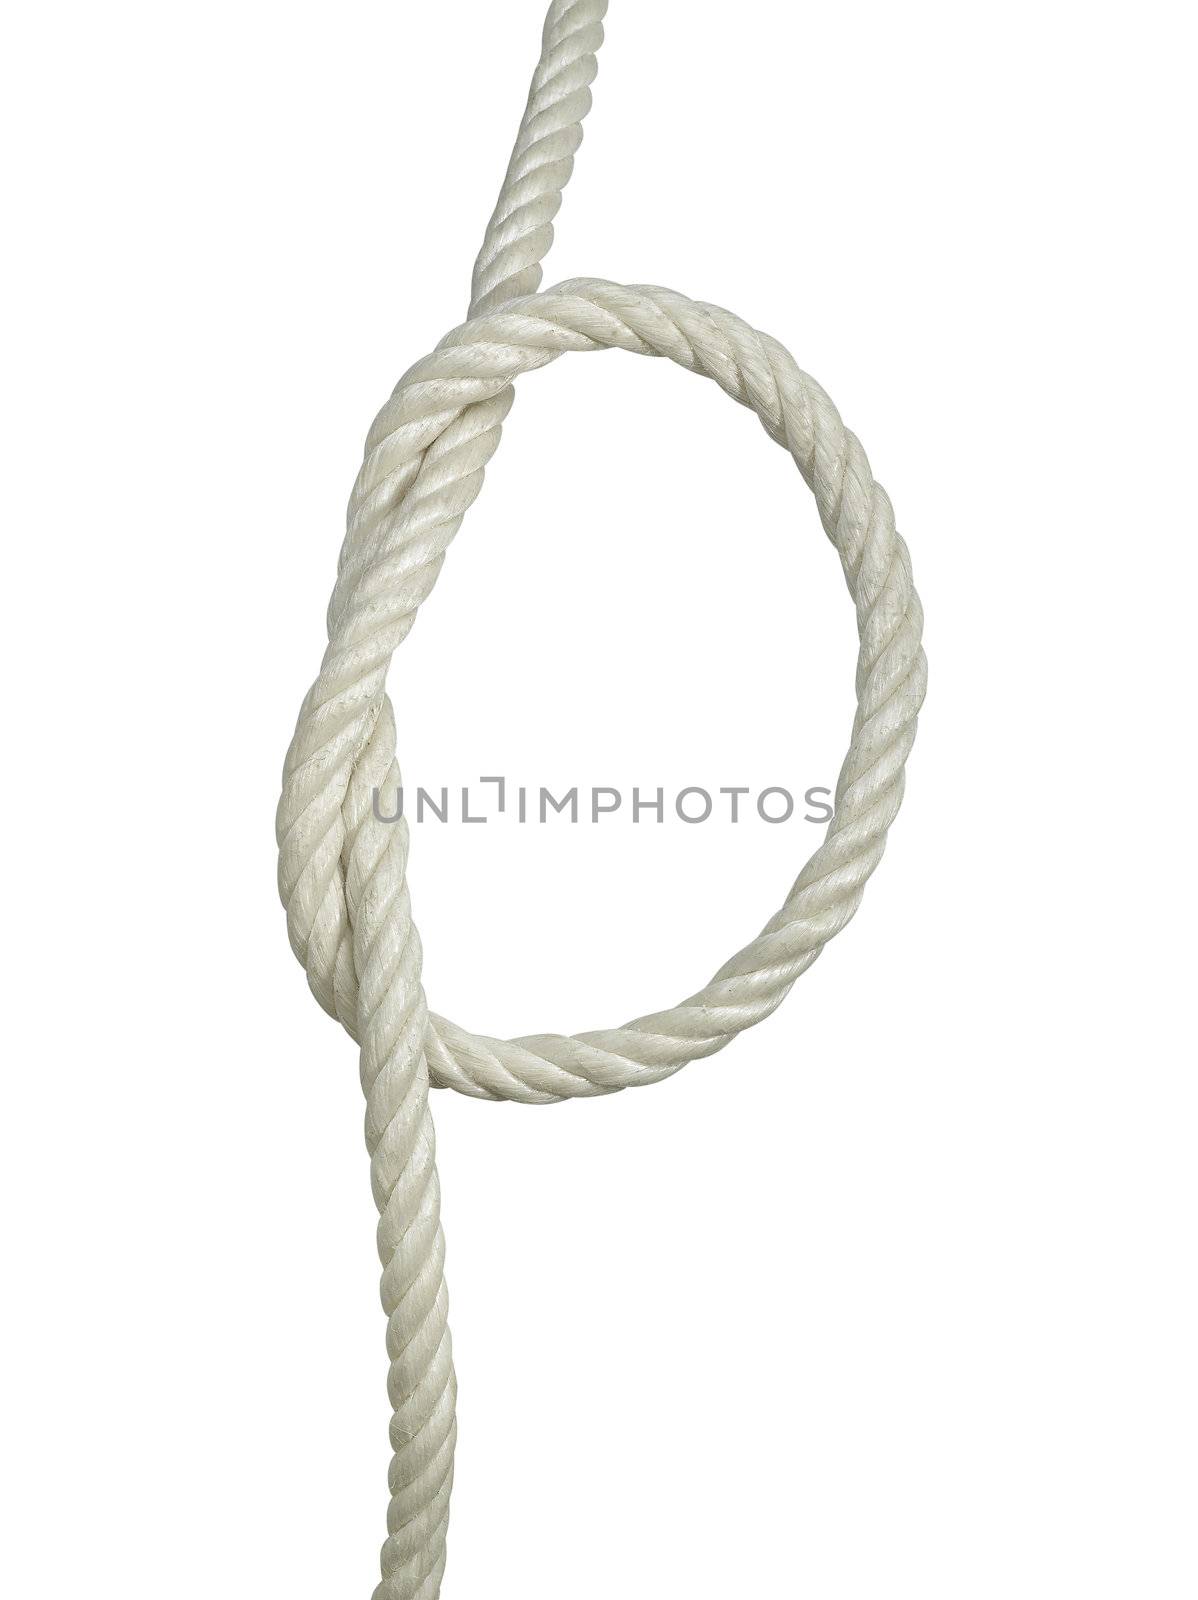 Rope with a knot on white background by pbombaert